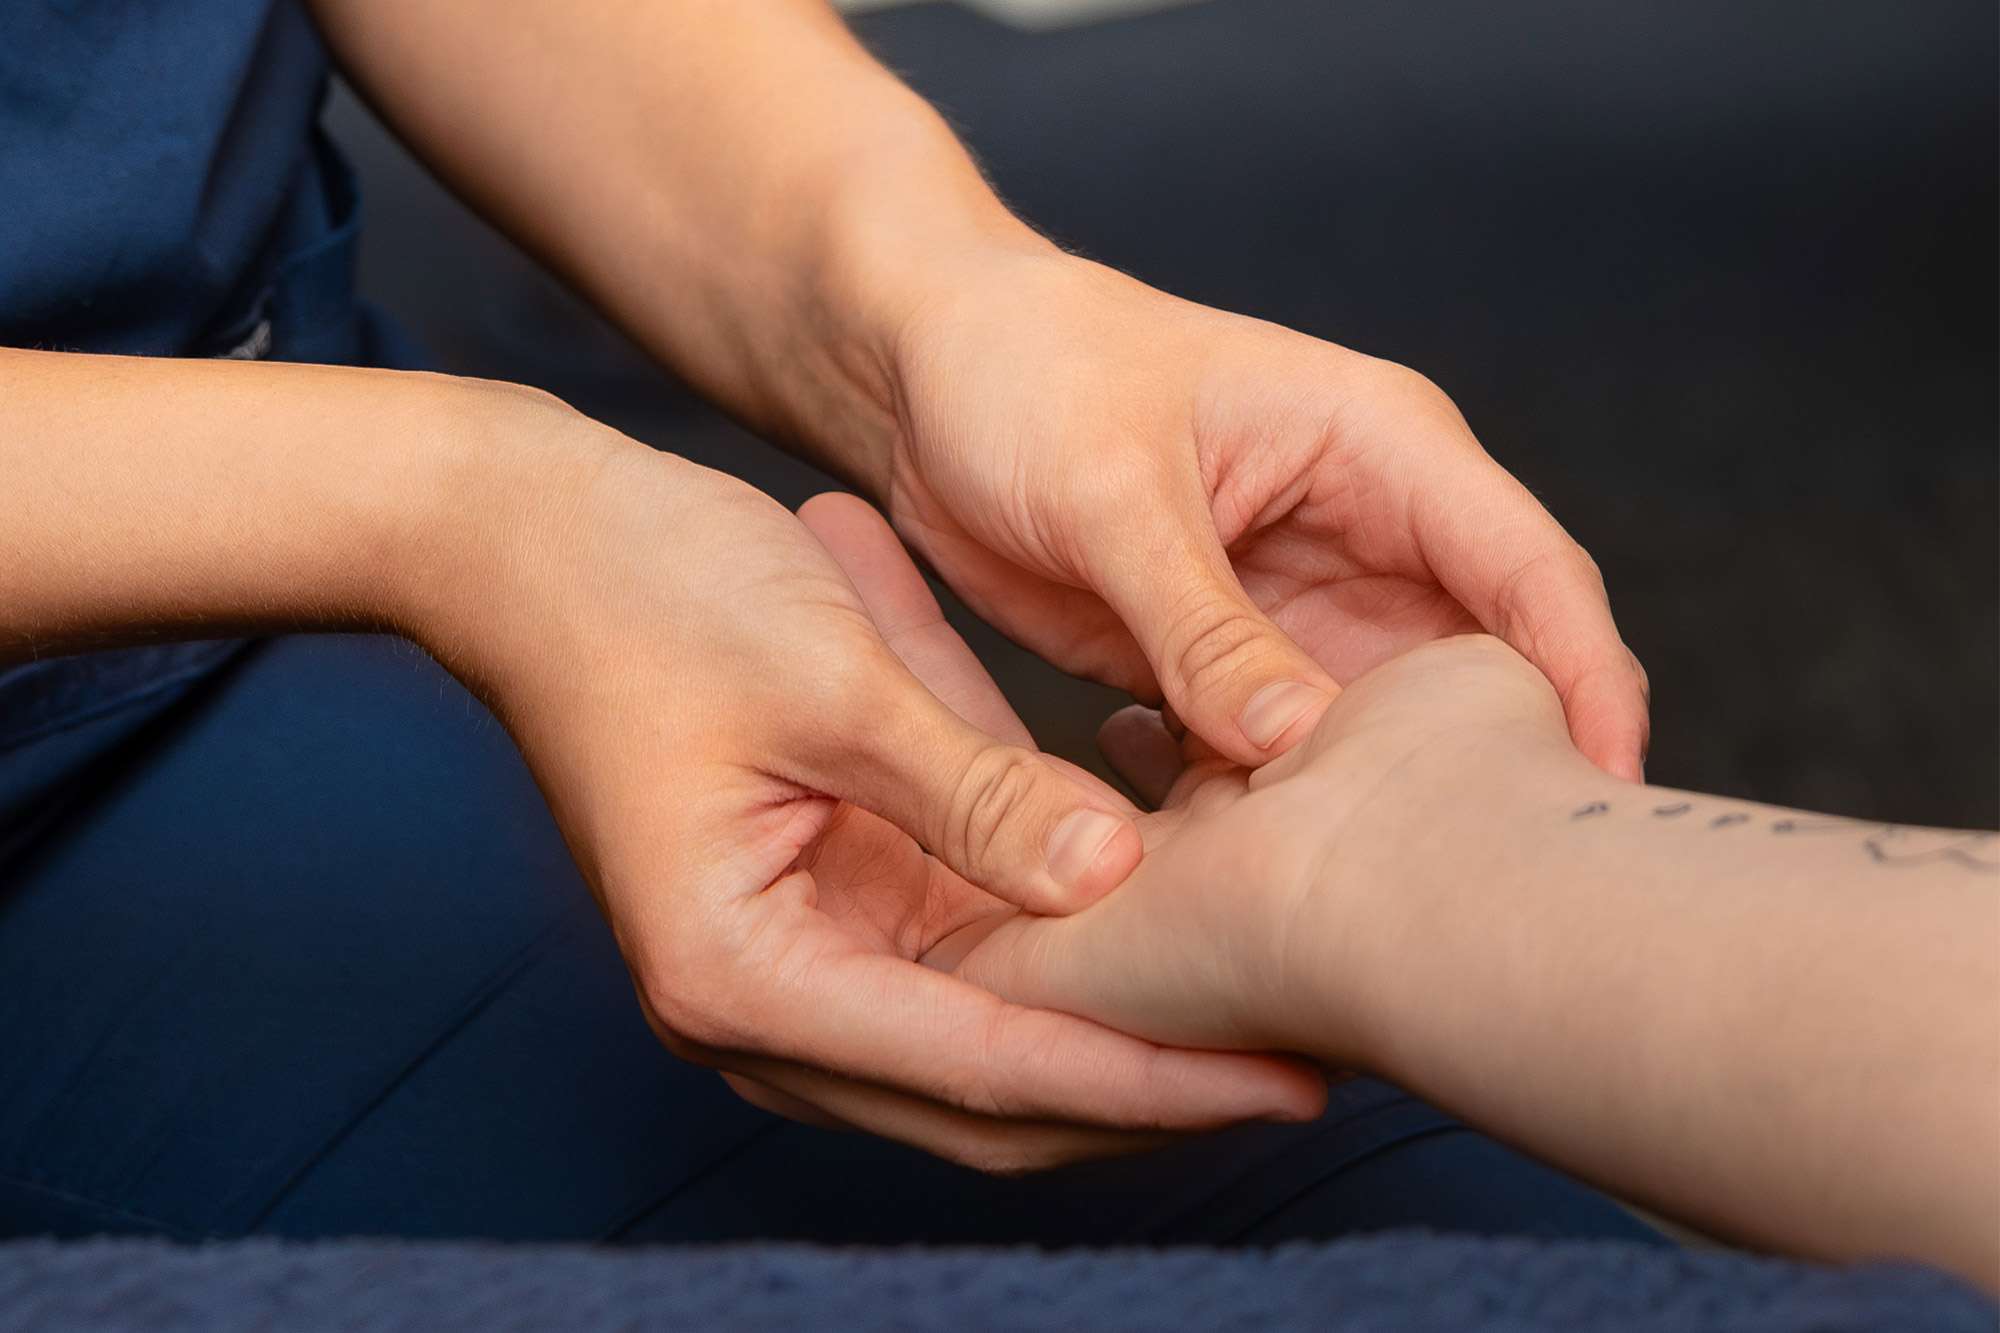 A close up view of a massage therapist using both hands to massage the palm of a patient's hand.